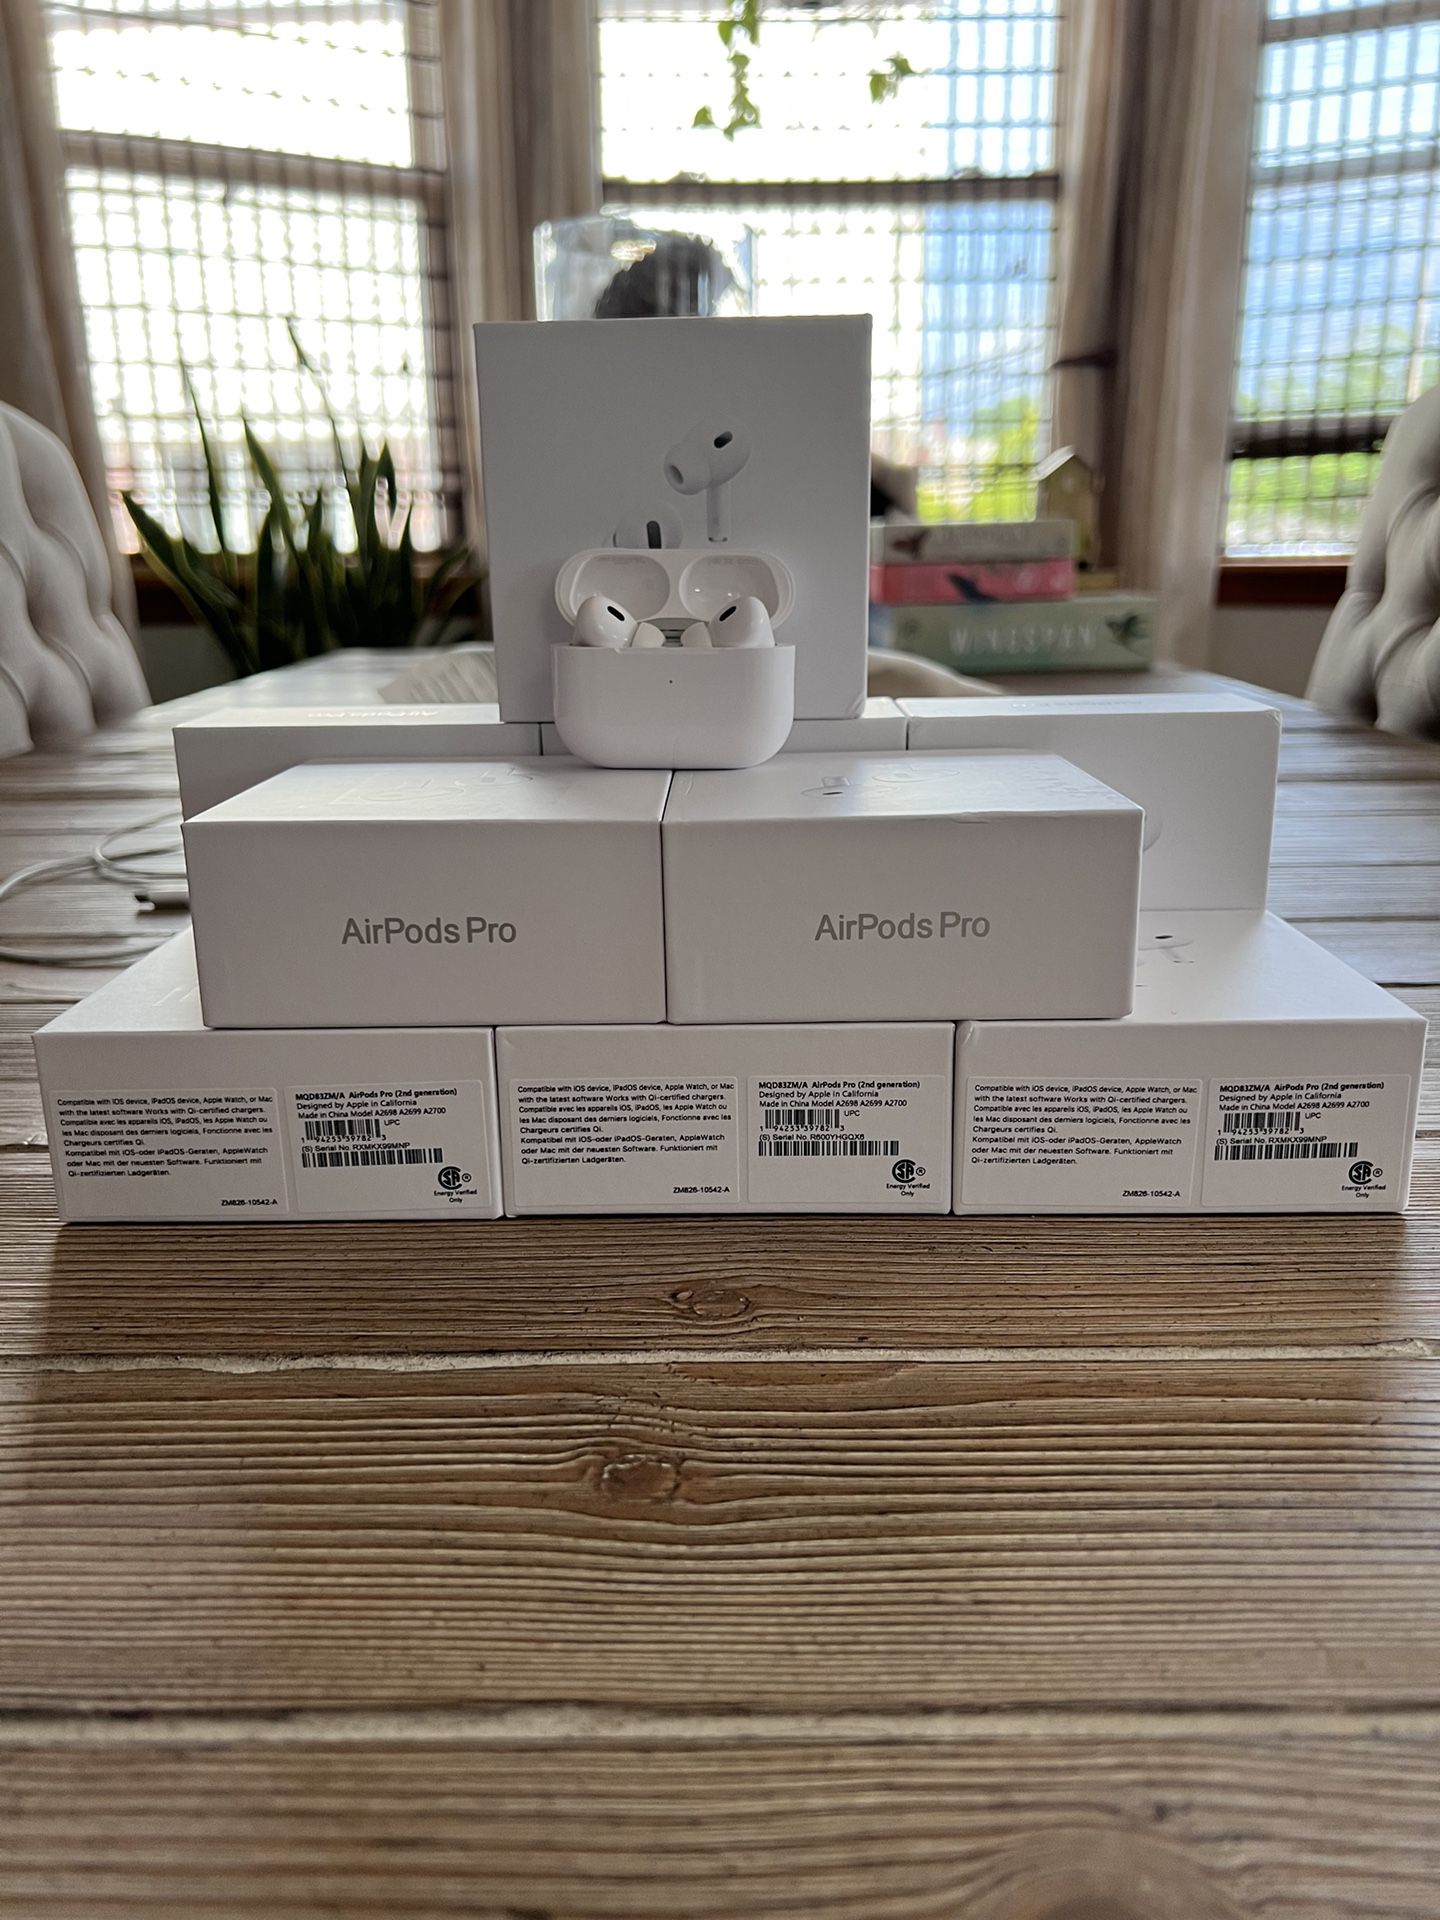 White AirPods Pro Apple Airpod, 2nd Generation